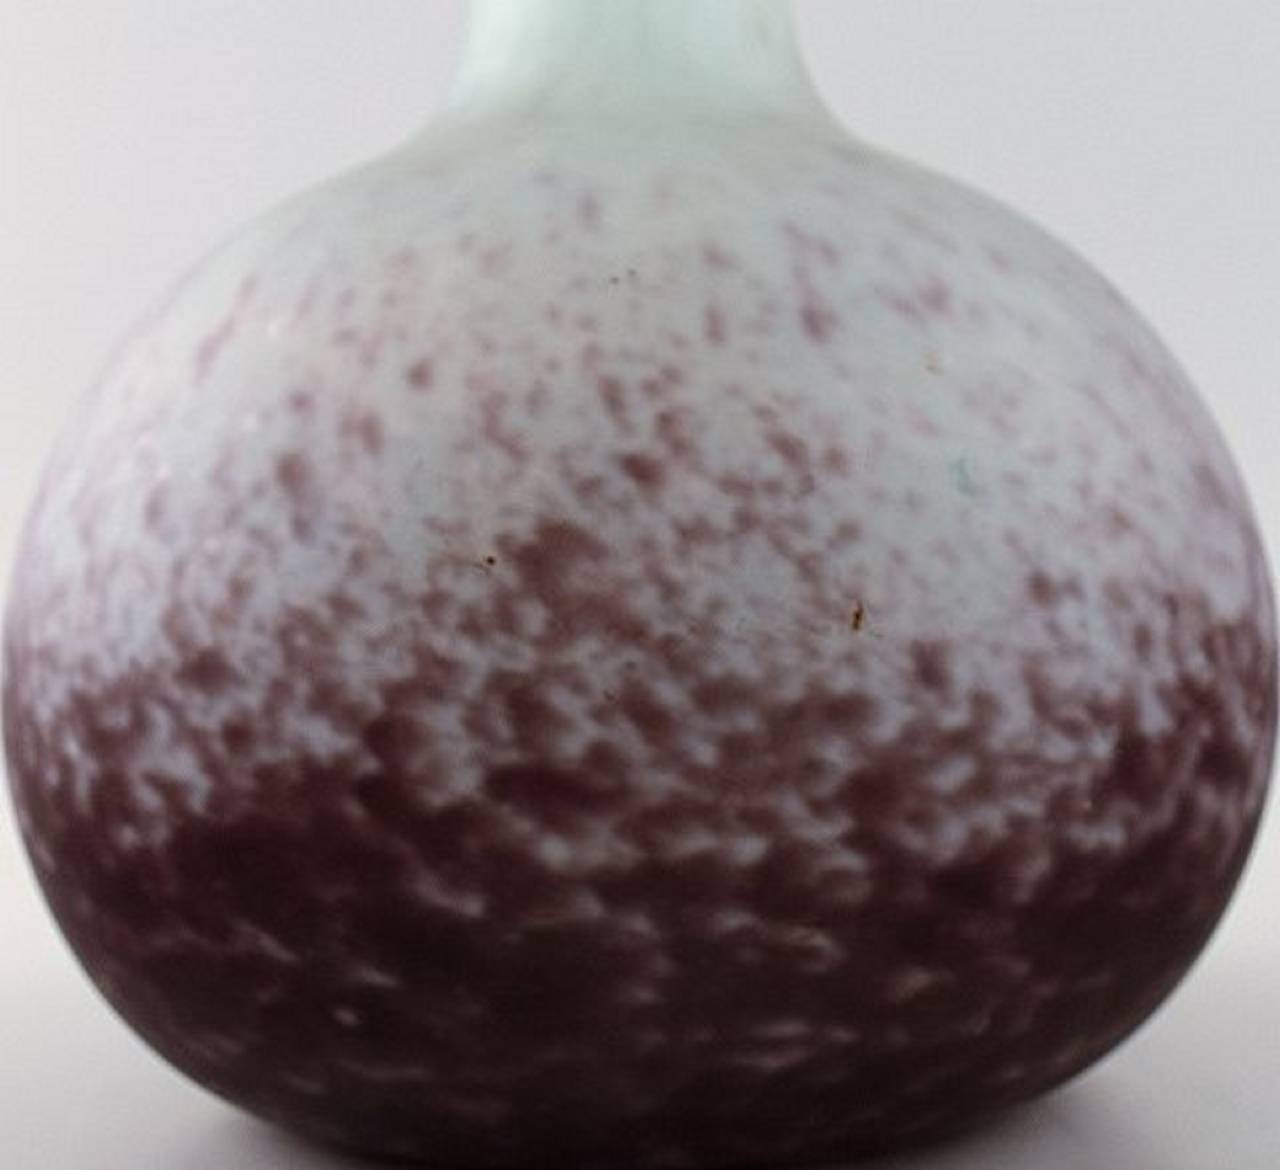 Monumental Daum, Nancy. Vase soliflore art glass in violette and blue nuances.
Signed. 53 cm height. In perfect condition.
Presumably unsigned.